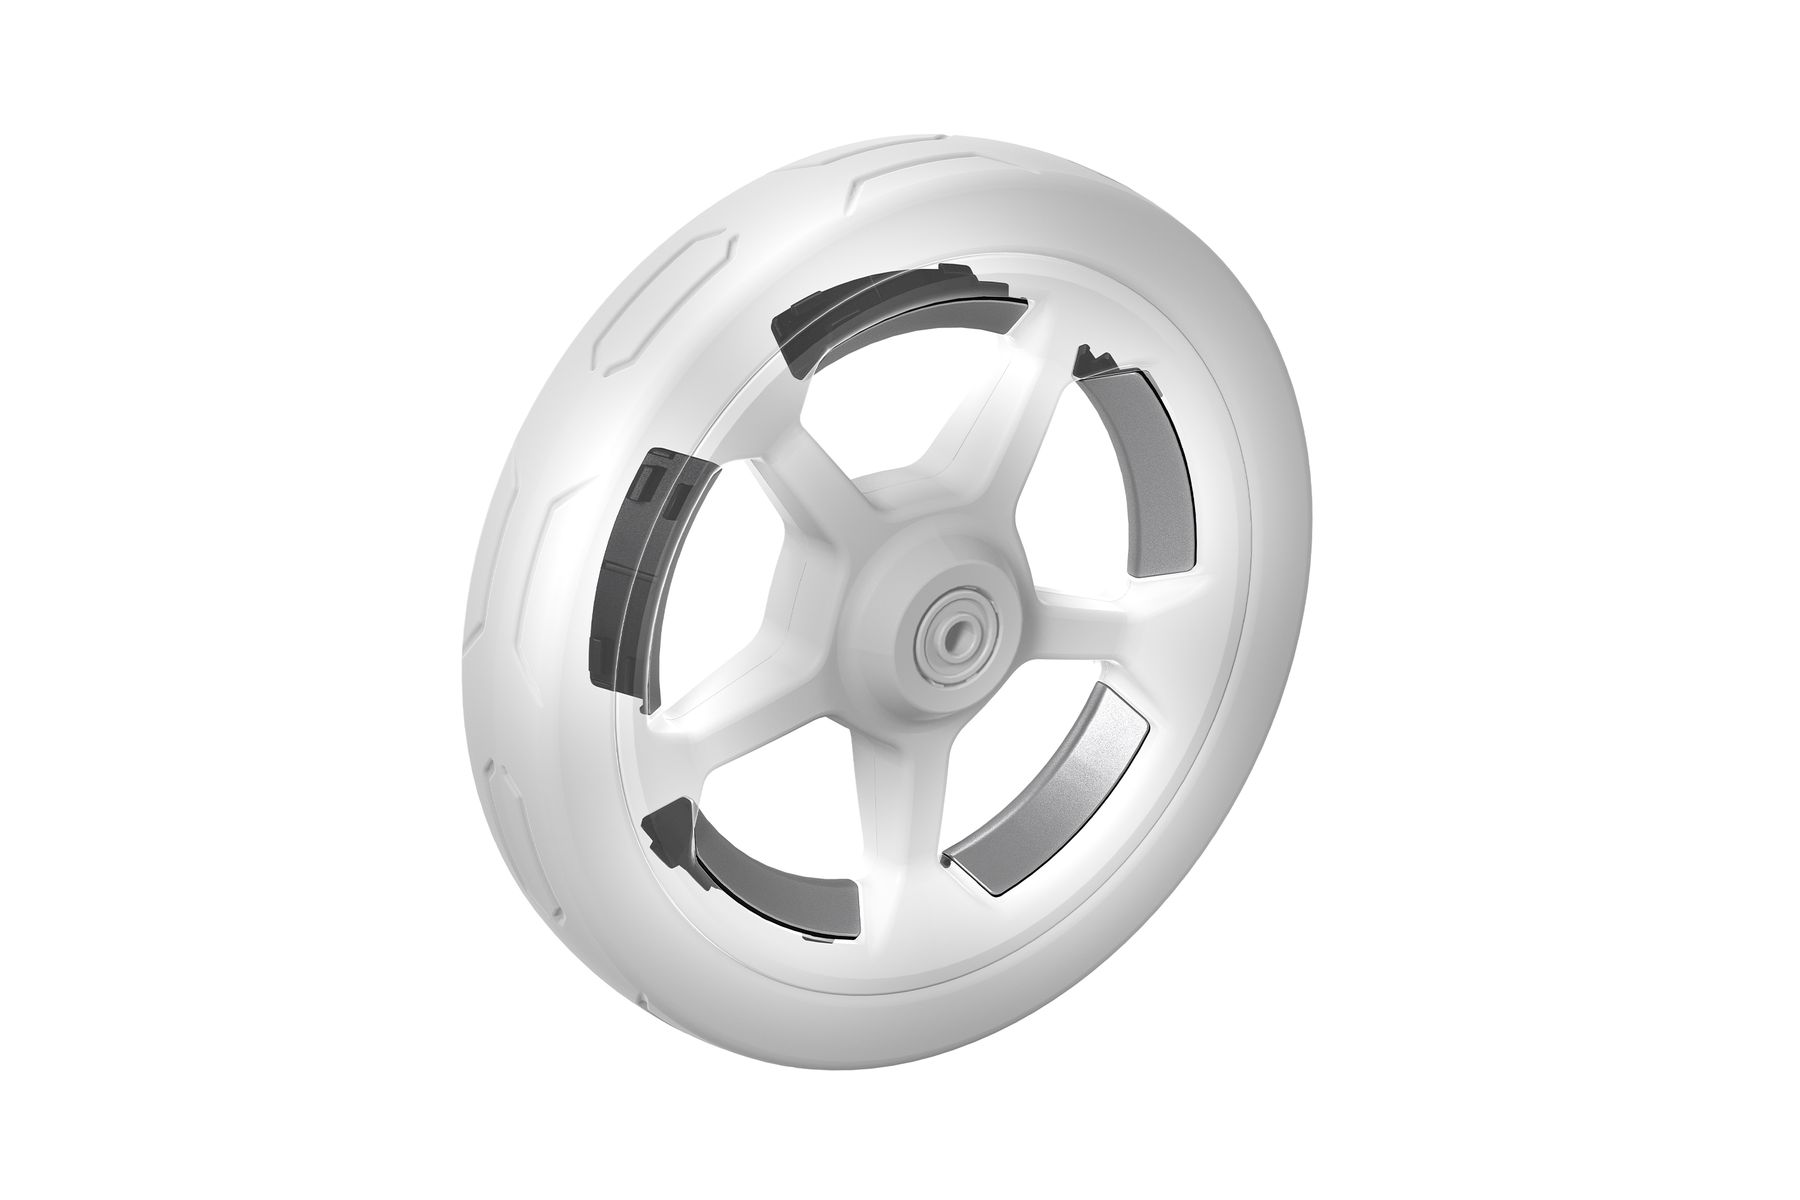 11300407_Spring_Reflective_Wheel_Kit_A_Installed_02